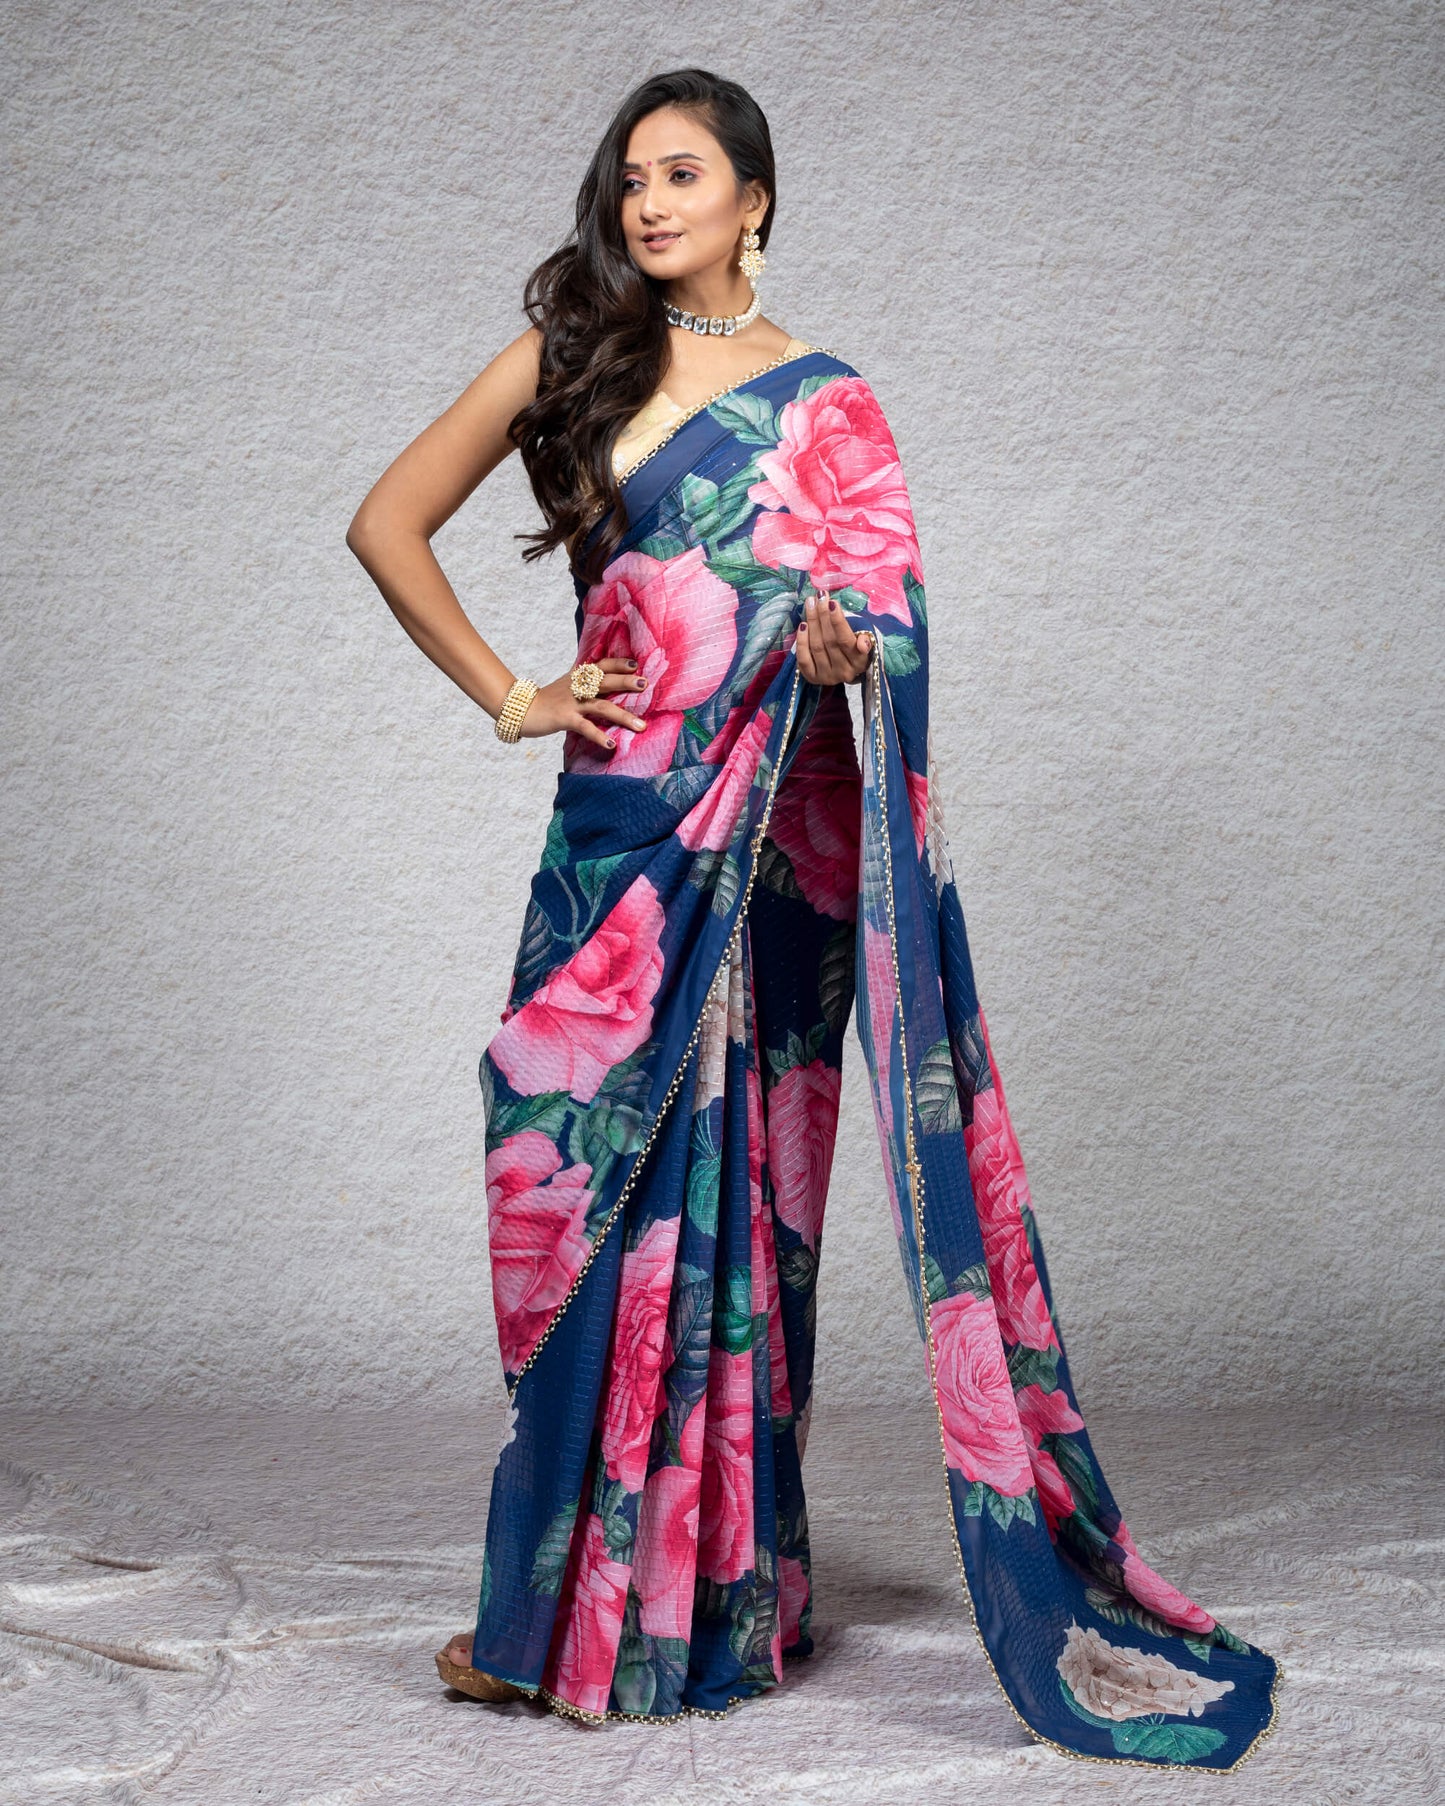 Yale Blue And Pink Floral Pattren Digital Print Sequins Georgette Saree With Tubular Beads Pearl Work Lace Border